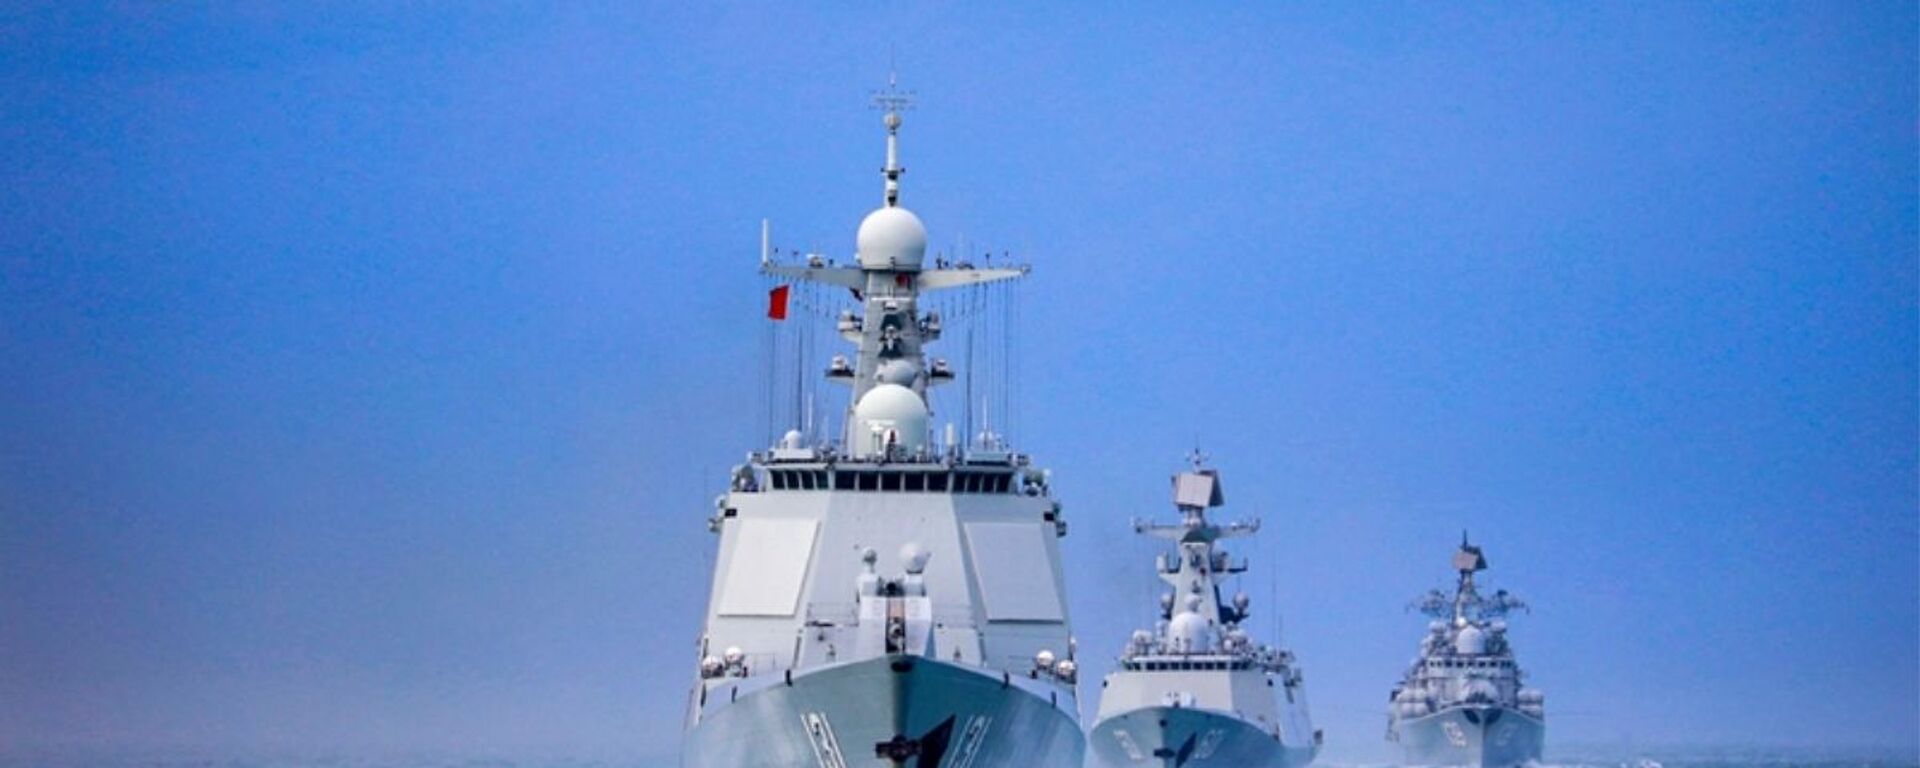 A naval fleet comprised of the guided-missile destroyers Ningbo (Hull 139) and Taiyuan (Hull 131), as well as the guided-missile frigate Nantong (Hull 601), steams in astern formation in waters of the East China Sea during a maritime training drill in late January, 2021 - Sputnik International, 1920, 22.08.2022